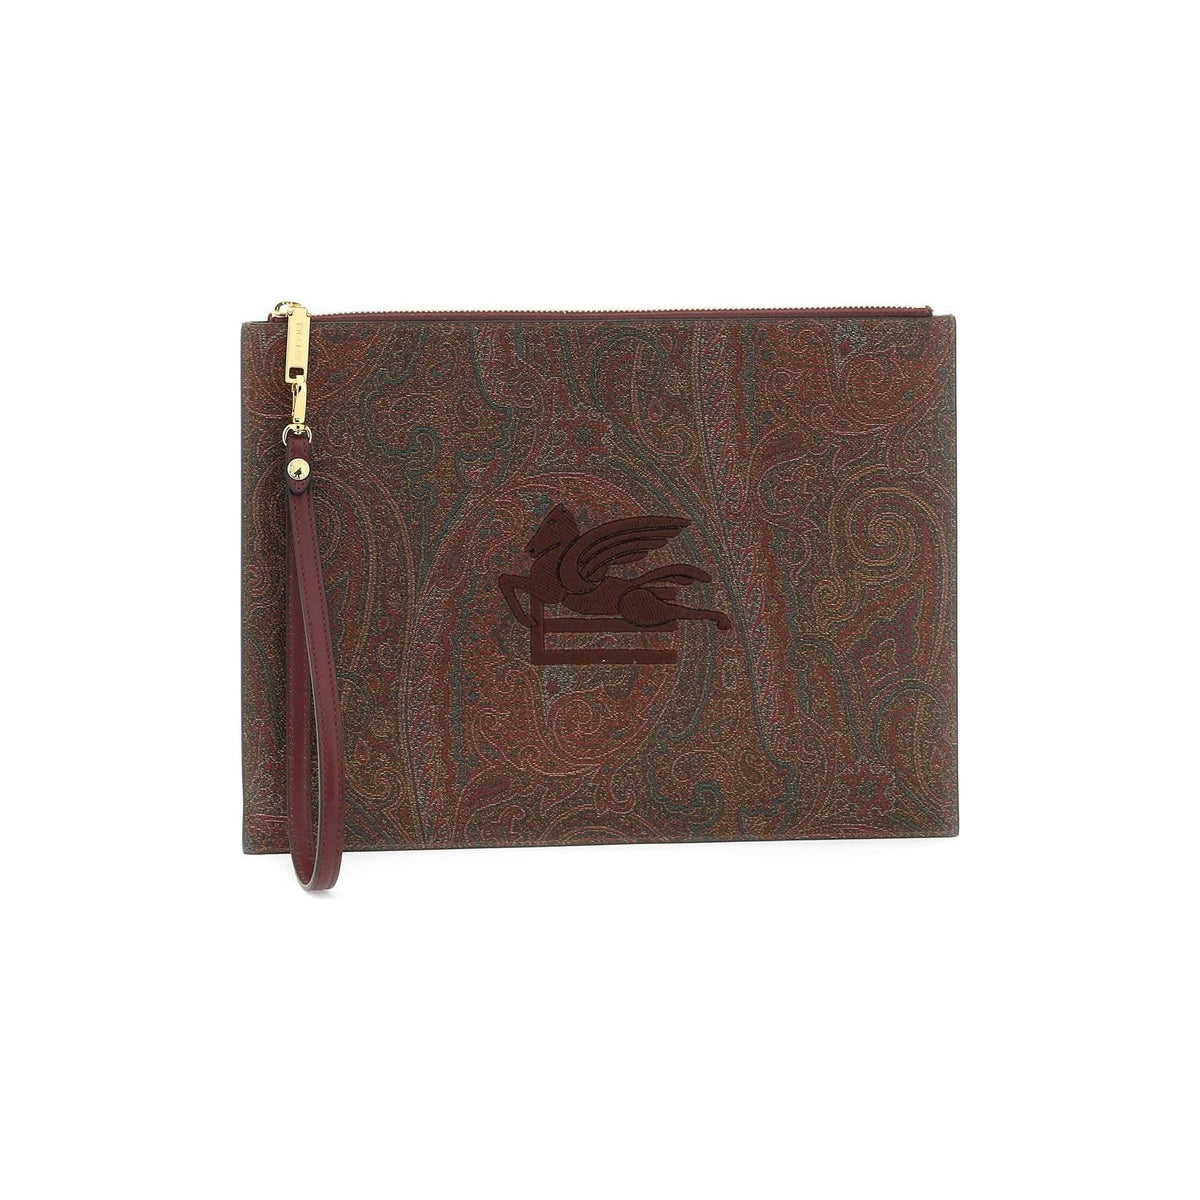 ETRO - Paisley Coated Canvas Embroidered Pouch - JOHN JULIA